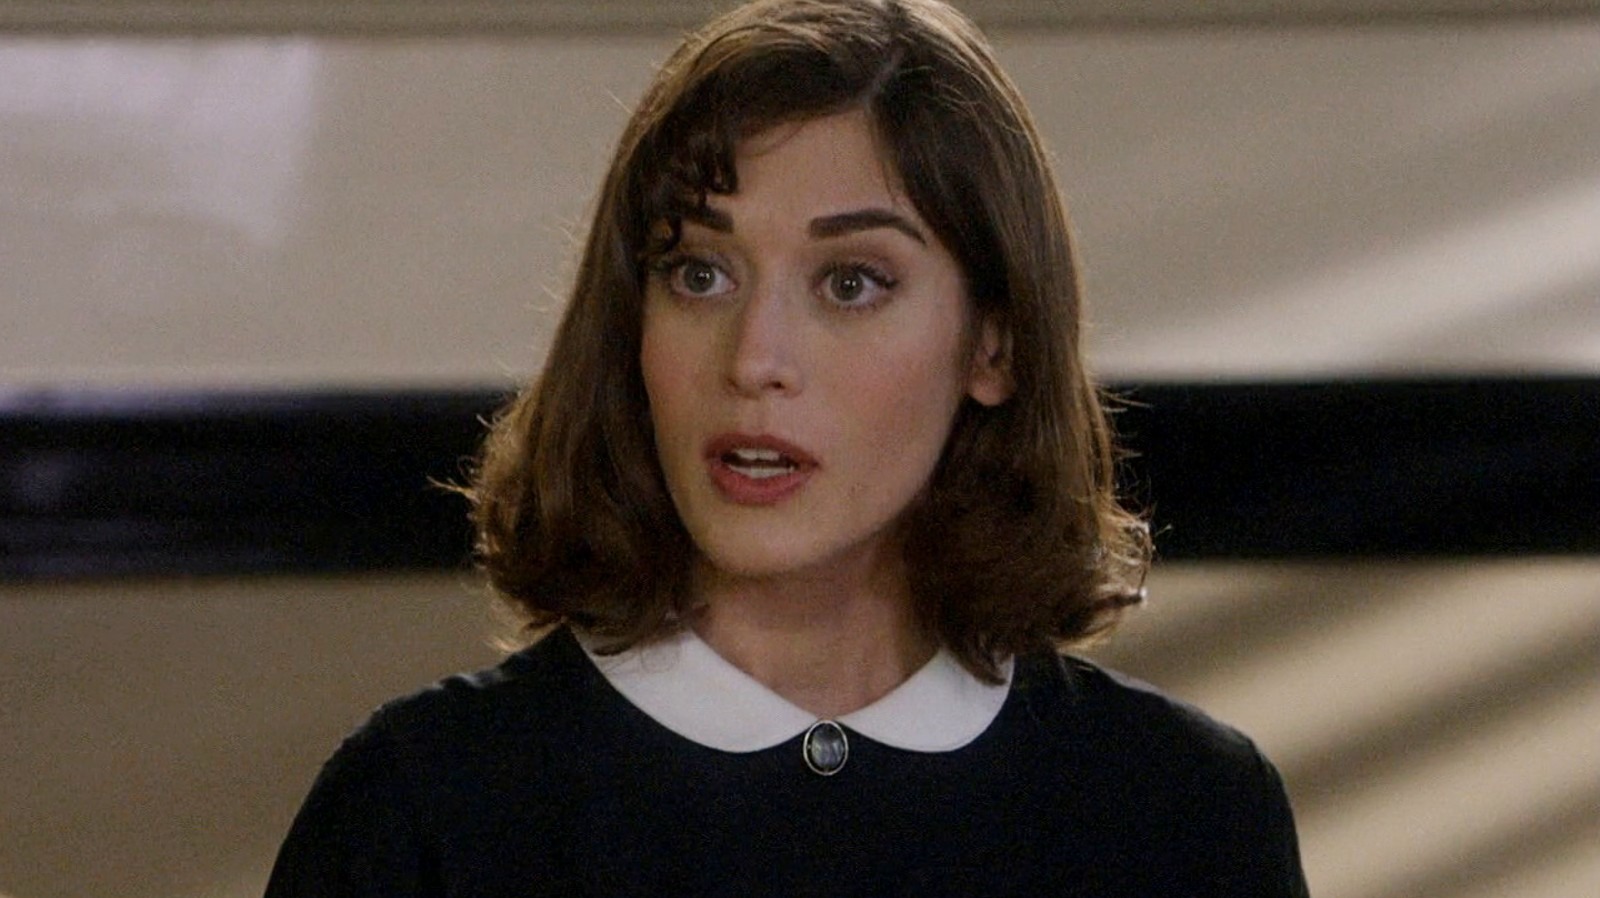 Fatal Attraction TV Show Coming To Paramount+, Will Star Lizzy Caplan